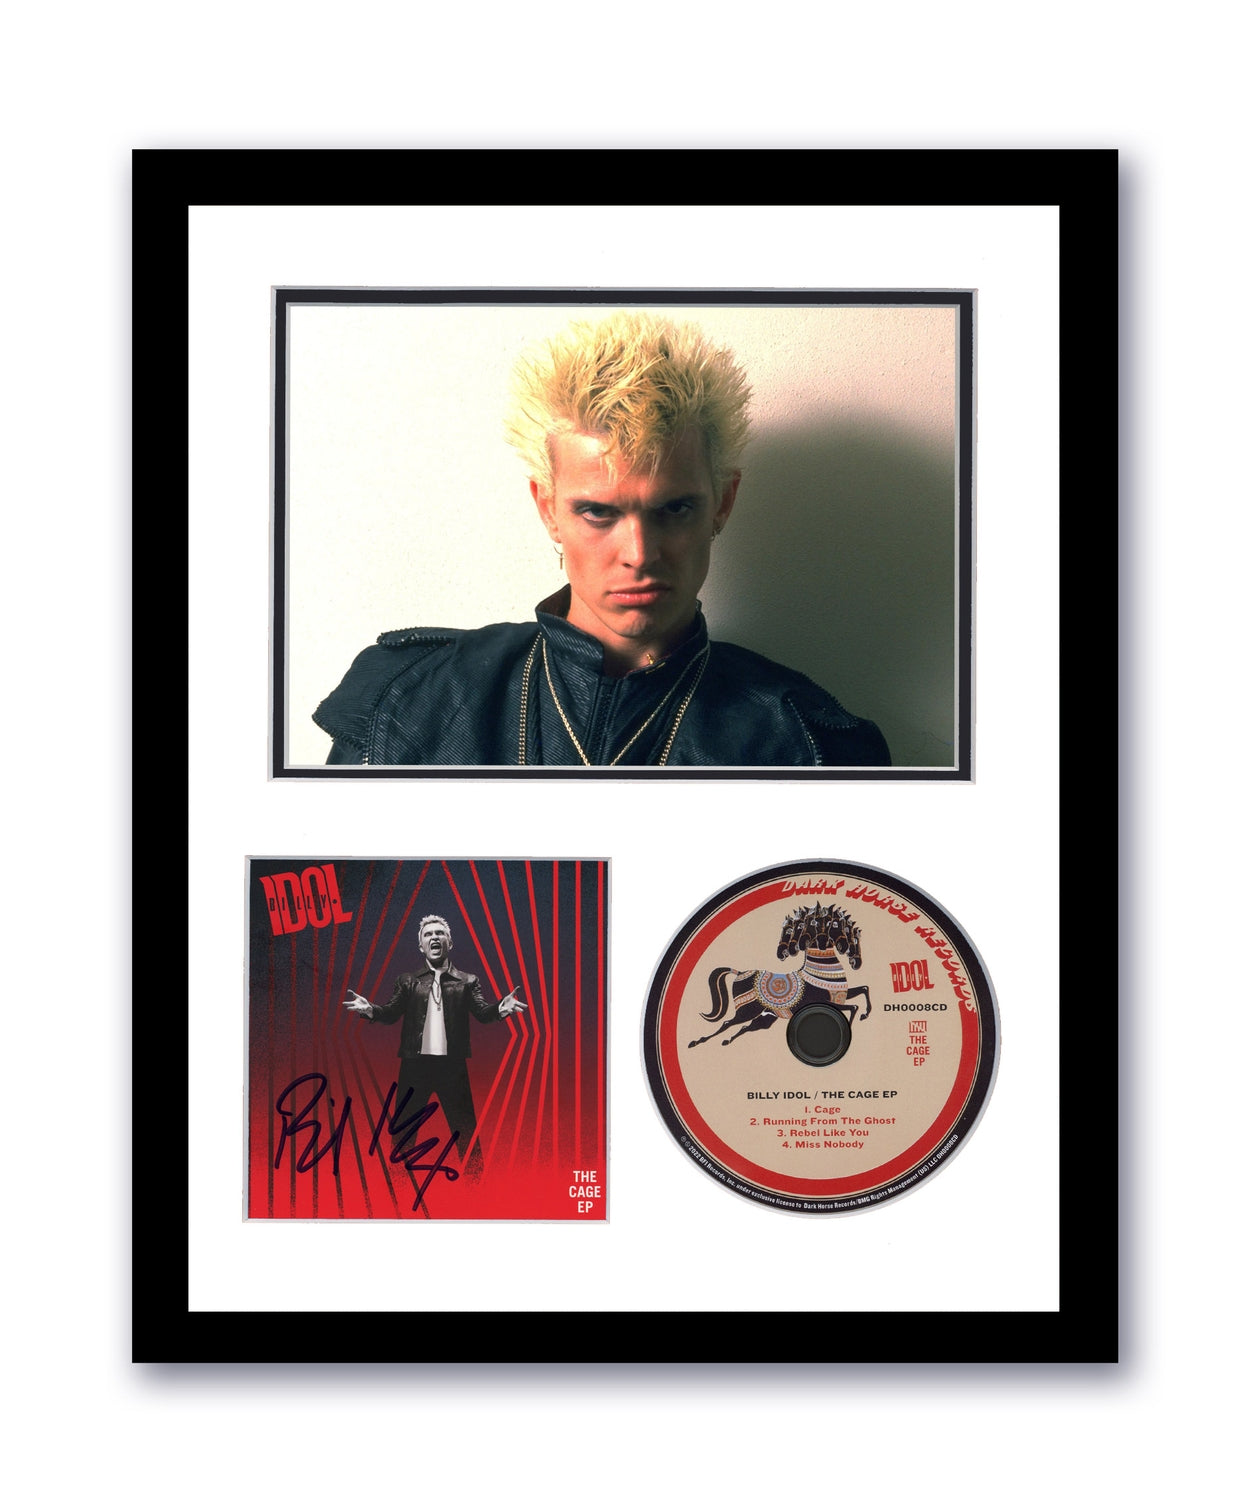 Billy Idol Autographed Signed 11x14 Framed CD The Cage EP ACOA 6